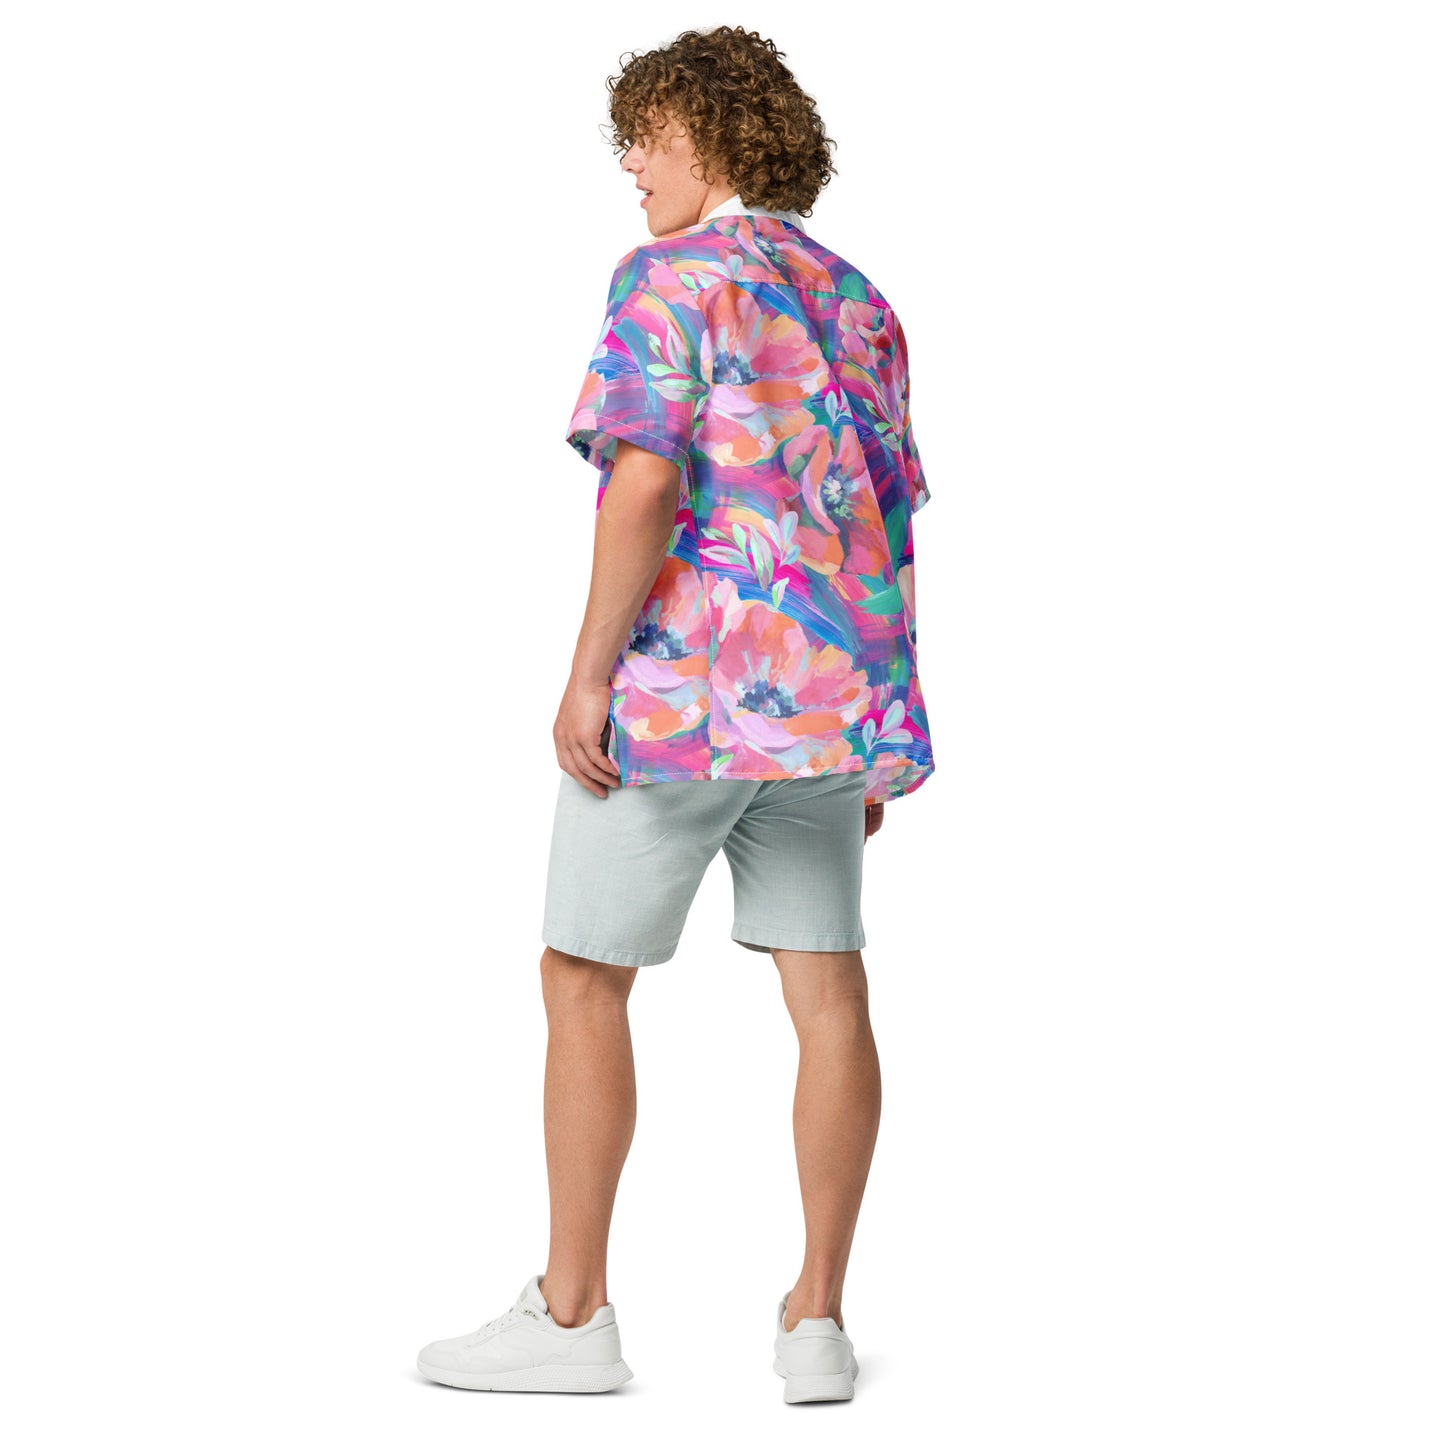 Humble Sportswear, men's floral abstract moisture-wicking button shirt